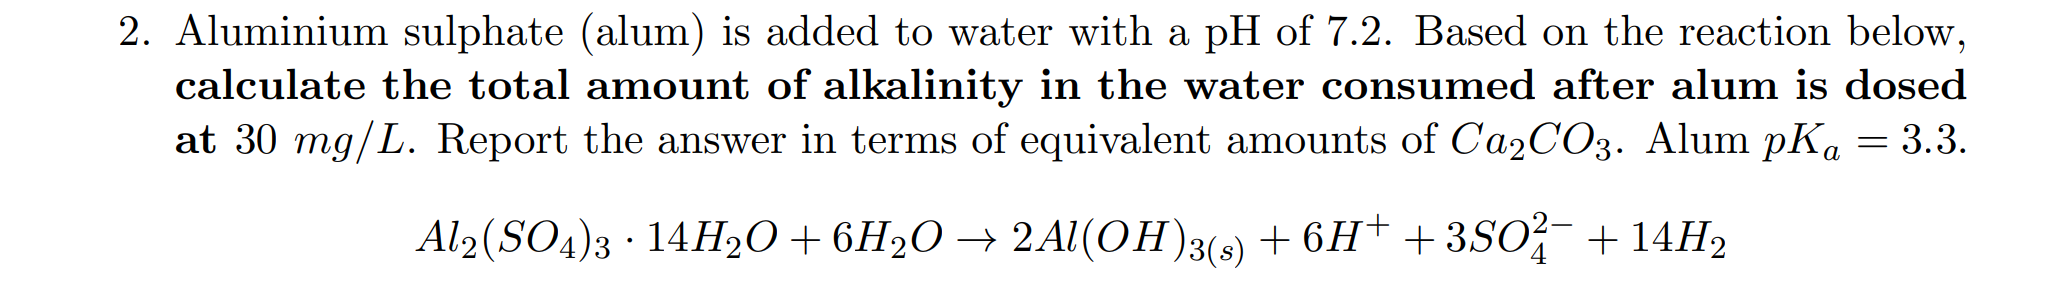 2. Aluminium sulphate (alum) is added to water with a pH of 7.2. Based on the reaction below,
calculate the total amount of alkalinity in the water consumed after alum is dosed
at 30 mg/L. Report the answer in terms of equivalent amounts of Ca2CO3. Alum pKa
3.3.
Al2(SO4)3 · 14H2O+6H2O → 2 Al(OH)3(s) + 6H†+3SO¯+14H2
